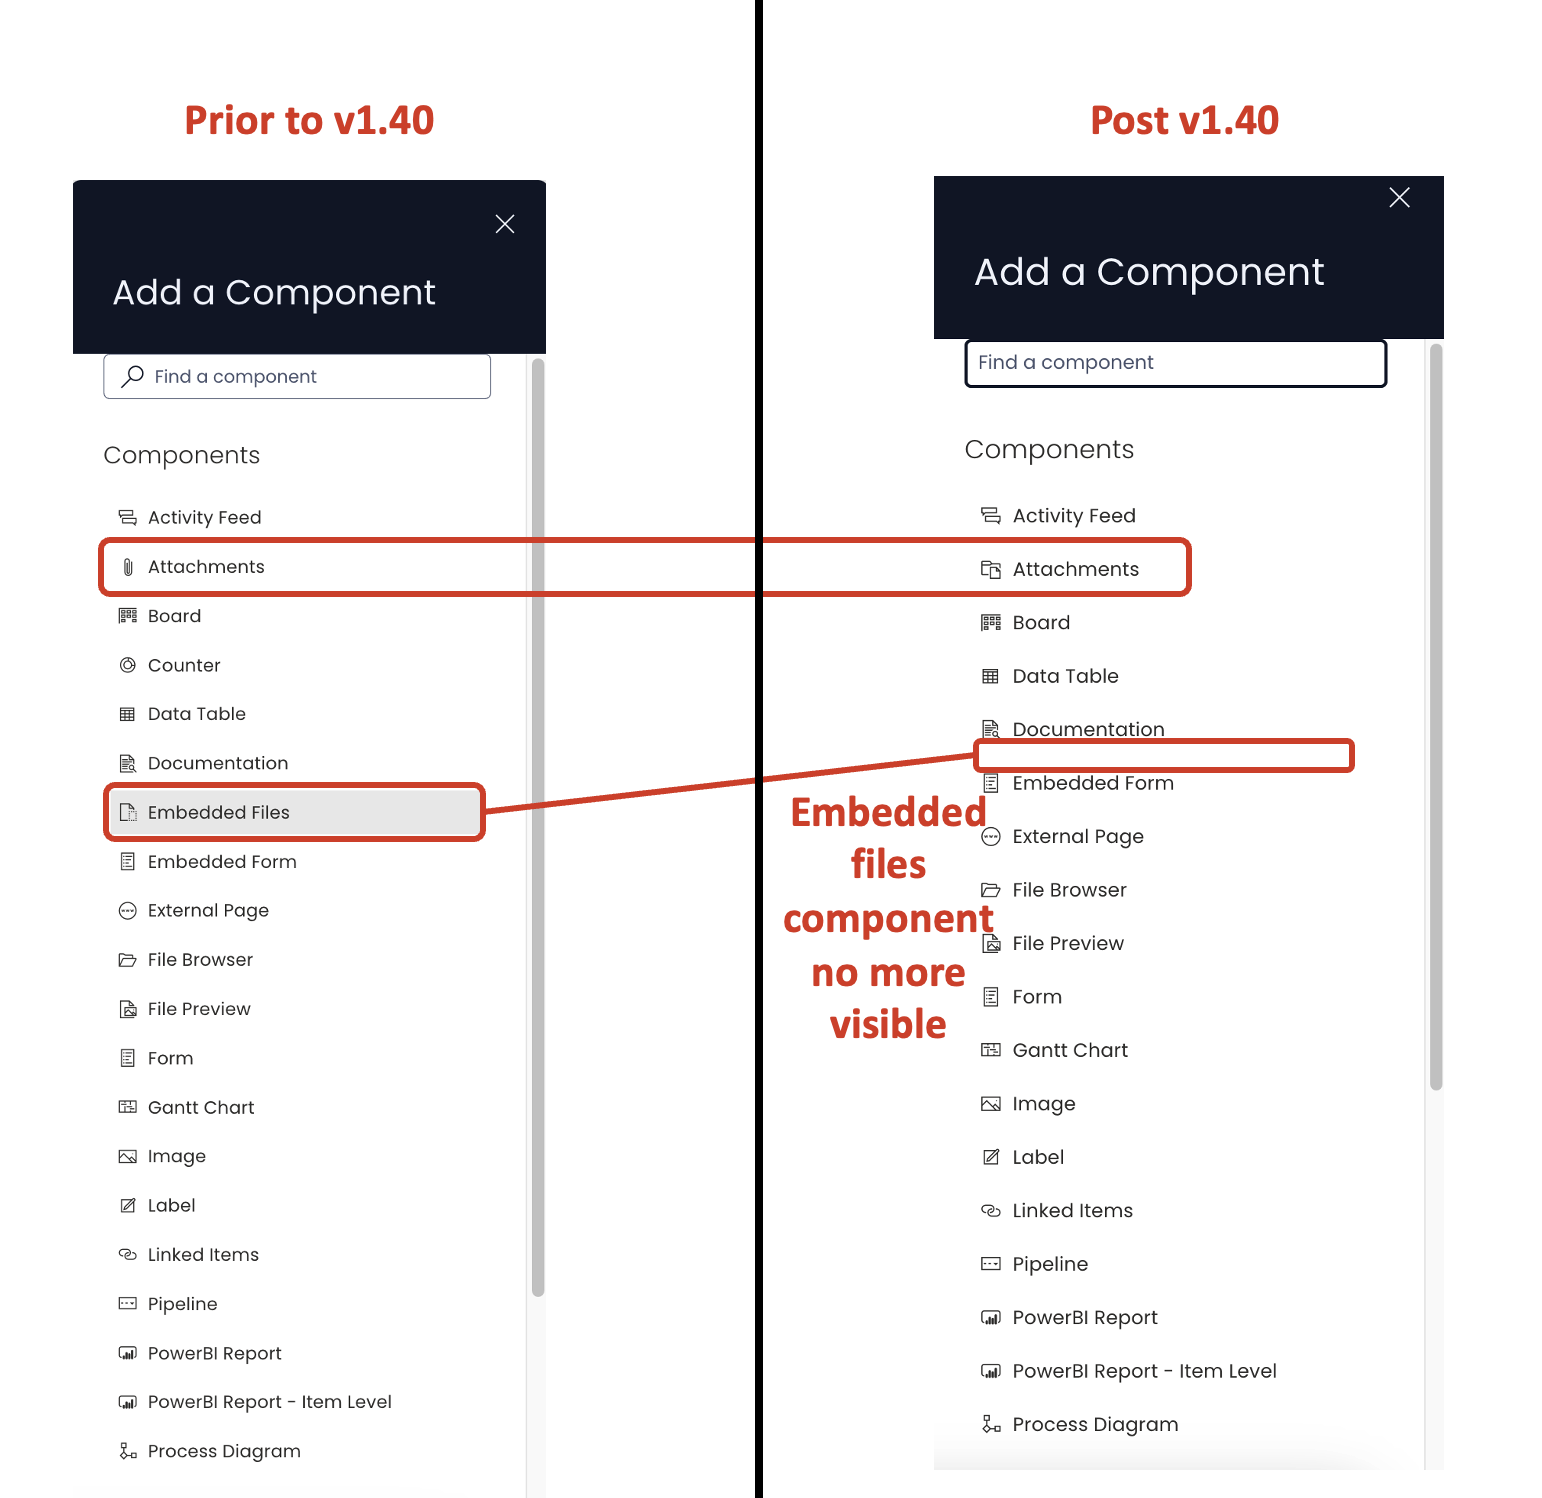 Image showing comparison of components across versions pre and post 1.40